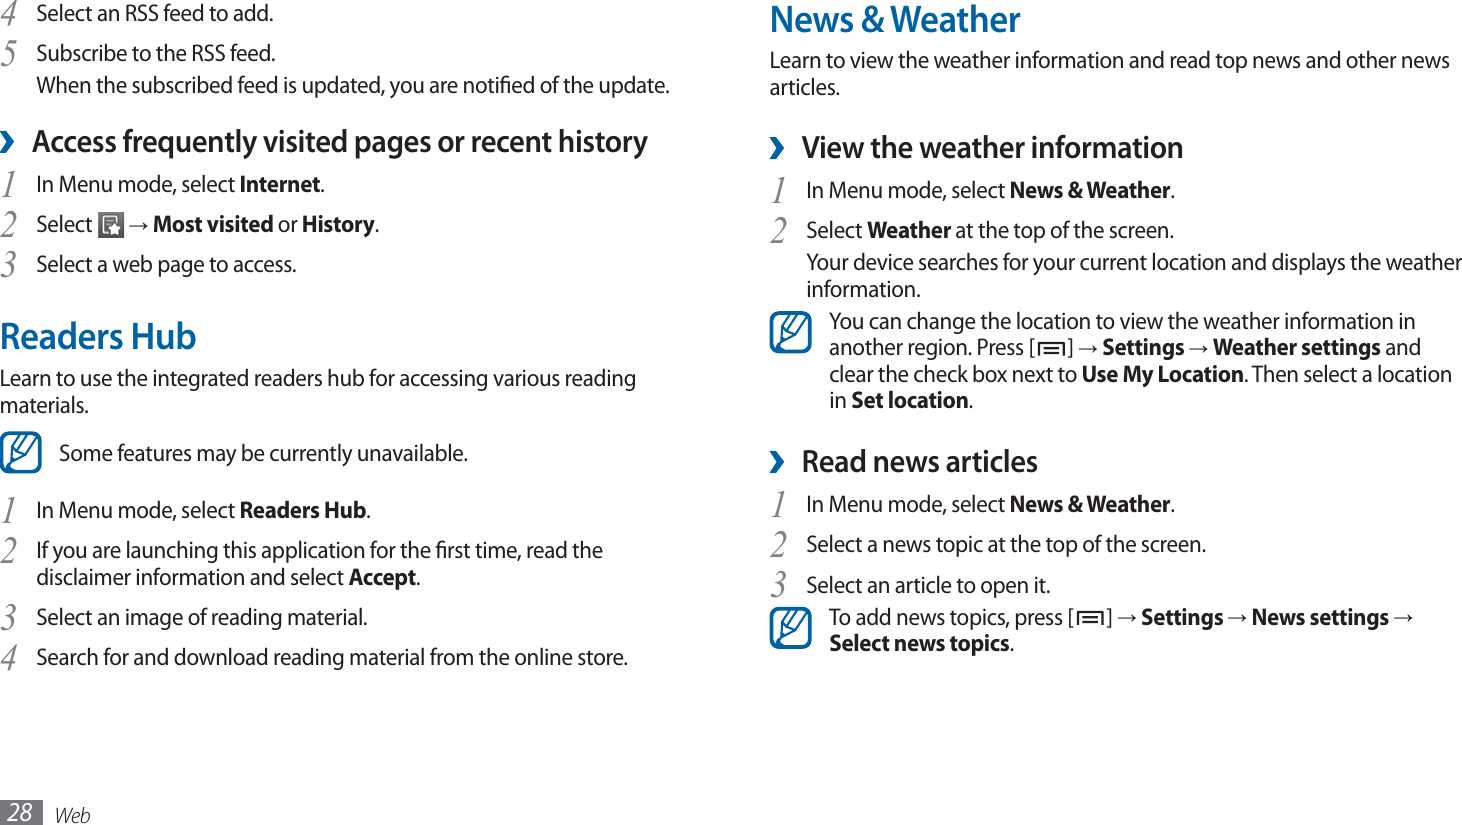 Web28News &amp; WeatherLearn to view the weather information and read top news and other news articles.View the weather information ›In Menu mode, select 1 News &amp; Weather.Select 2 Weather at the top of the screen.Your device searches for your current location and displays the weather information. You can change the location to view the weather information in another region. Press [ ] → Settings → Weather settings and clear the check box next to Use My Location. Then select a location in Set location.Read news articles ›In Menu mode, select 1 News &amp; Weather.Select a news topic at the top of the screen.2 Select an article to open it.3 To add news topics, press [ ] → Settings → News settings → Select news topics.Select an RSS feed to add.4 Subscribe to the RSS feed. 5 When the subscribed feed is updated, you are notied of the update.Access frequently visited pages or recent history ›In Menu mode, select 1 Internet.Select 2  → Most visited or History.Select a web page to access.3 Readers HubLearn to use the integrated readers hub for accessing various reading materials. Some features may be currently unavailable.In Menu mode, select 1 Readers Hub.If you are launching this application for the rst time, read the 2 disclaimer information and select Accept.Select an image of reading material.3 Search for and download reading material from the online store.4 